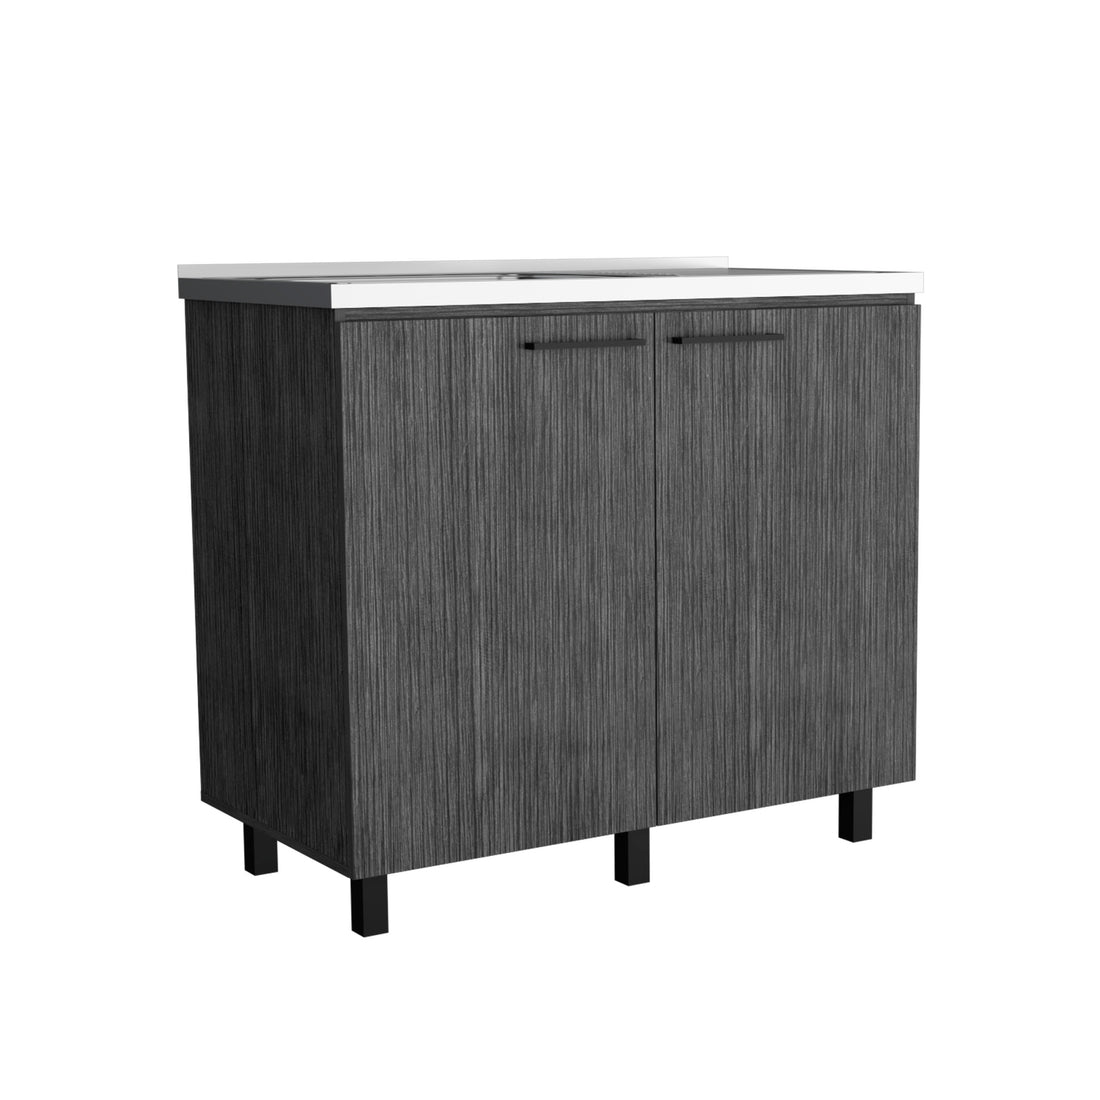 2 Freestanding Utility Base Cabinet With